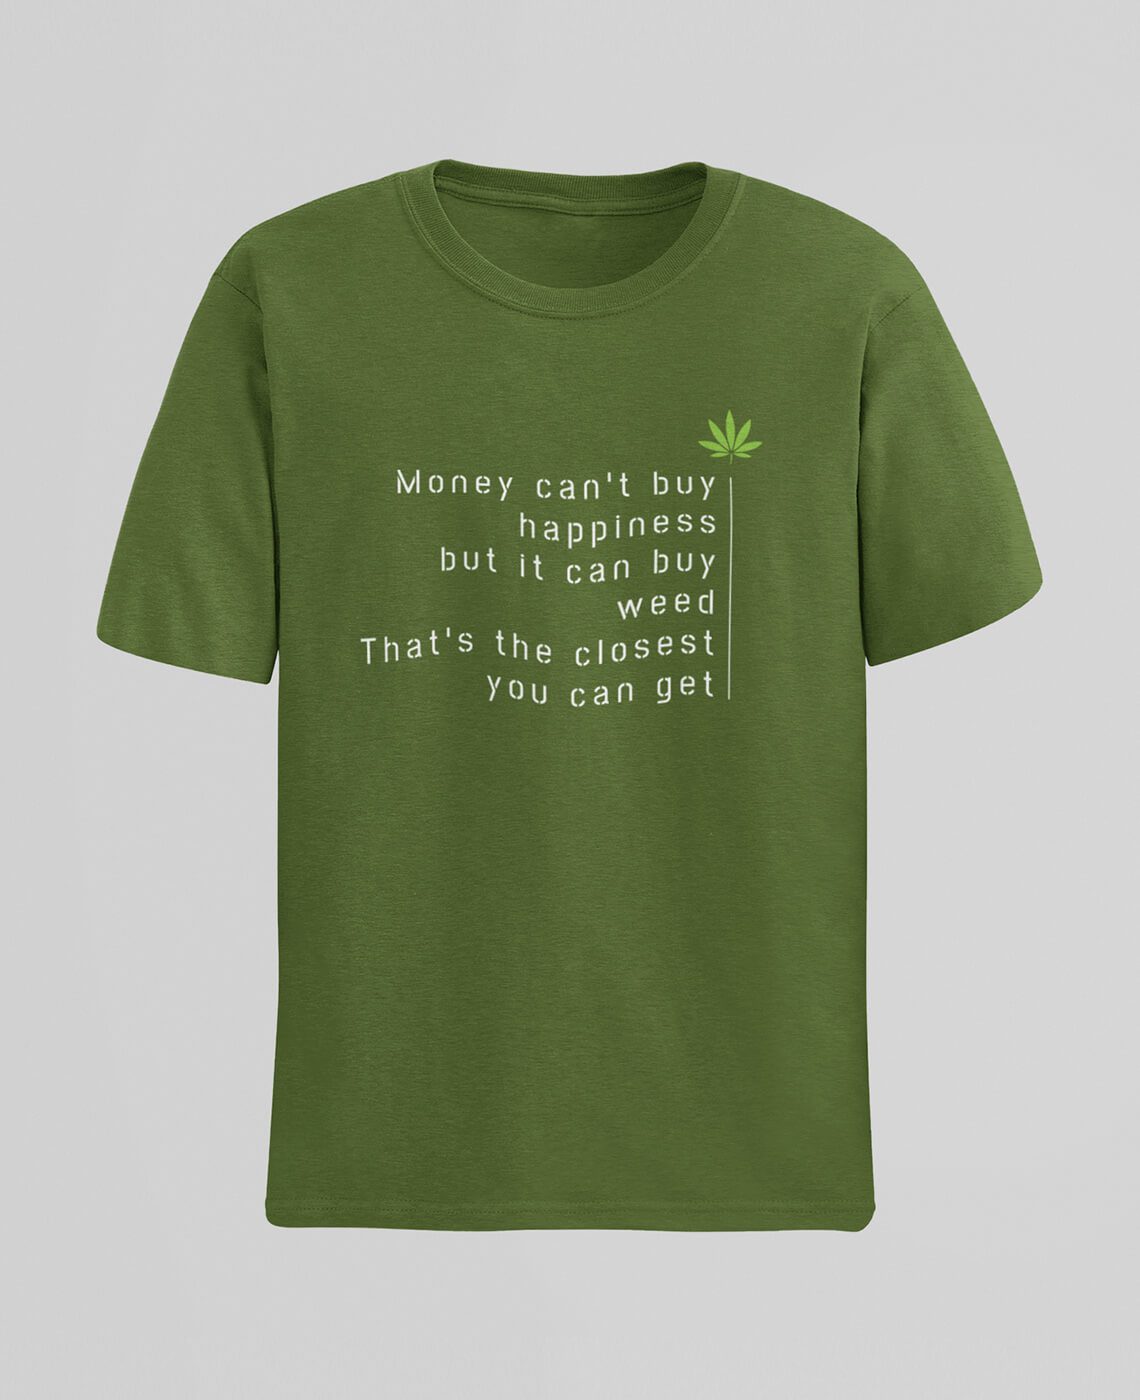 weed money one7 t shirt 4